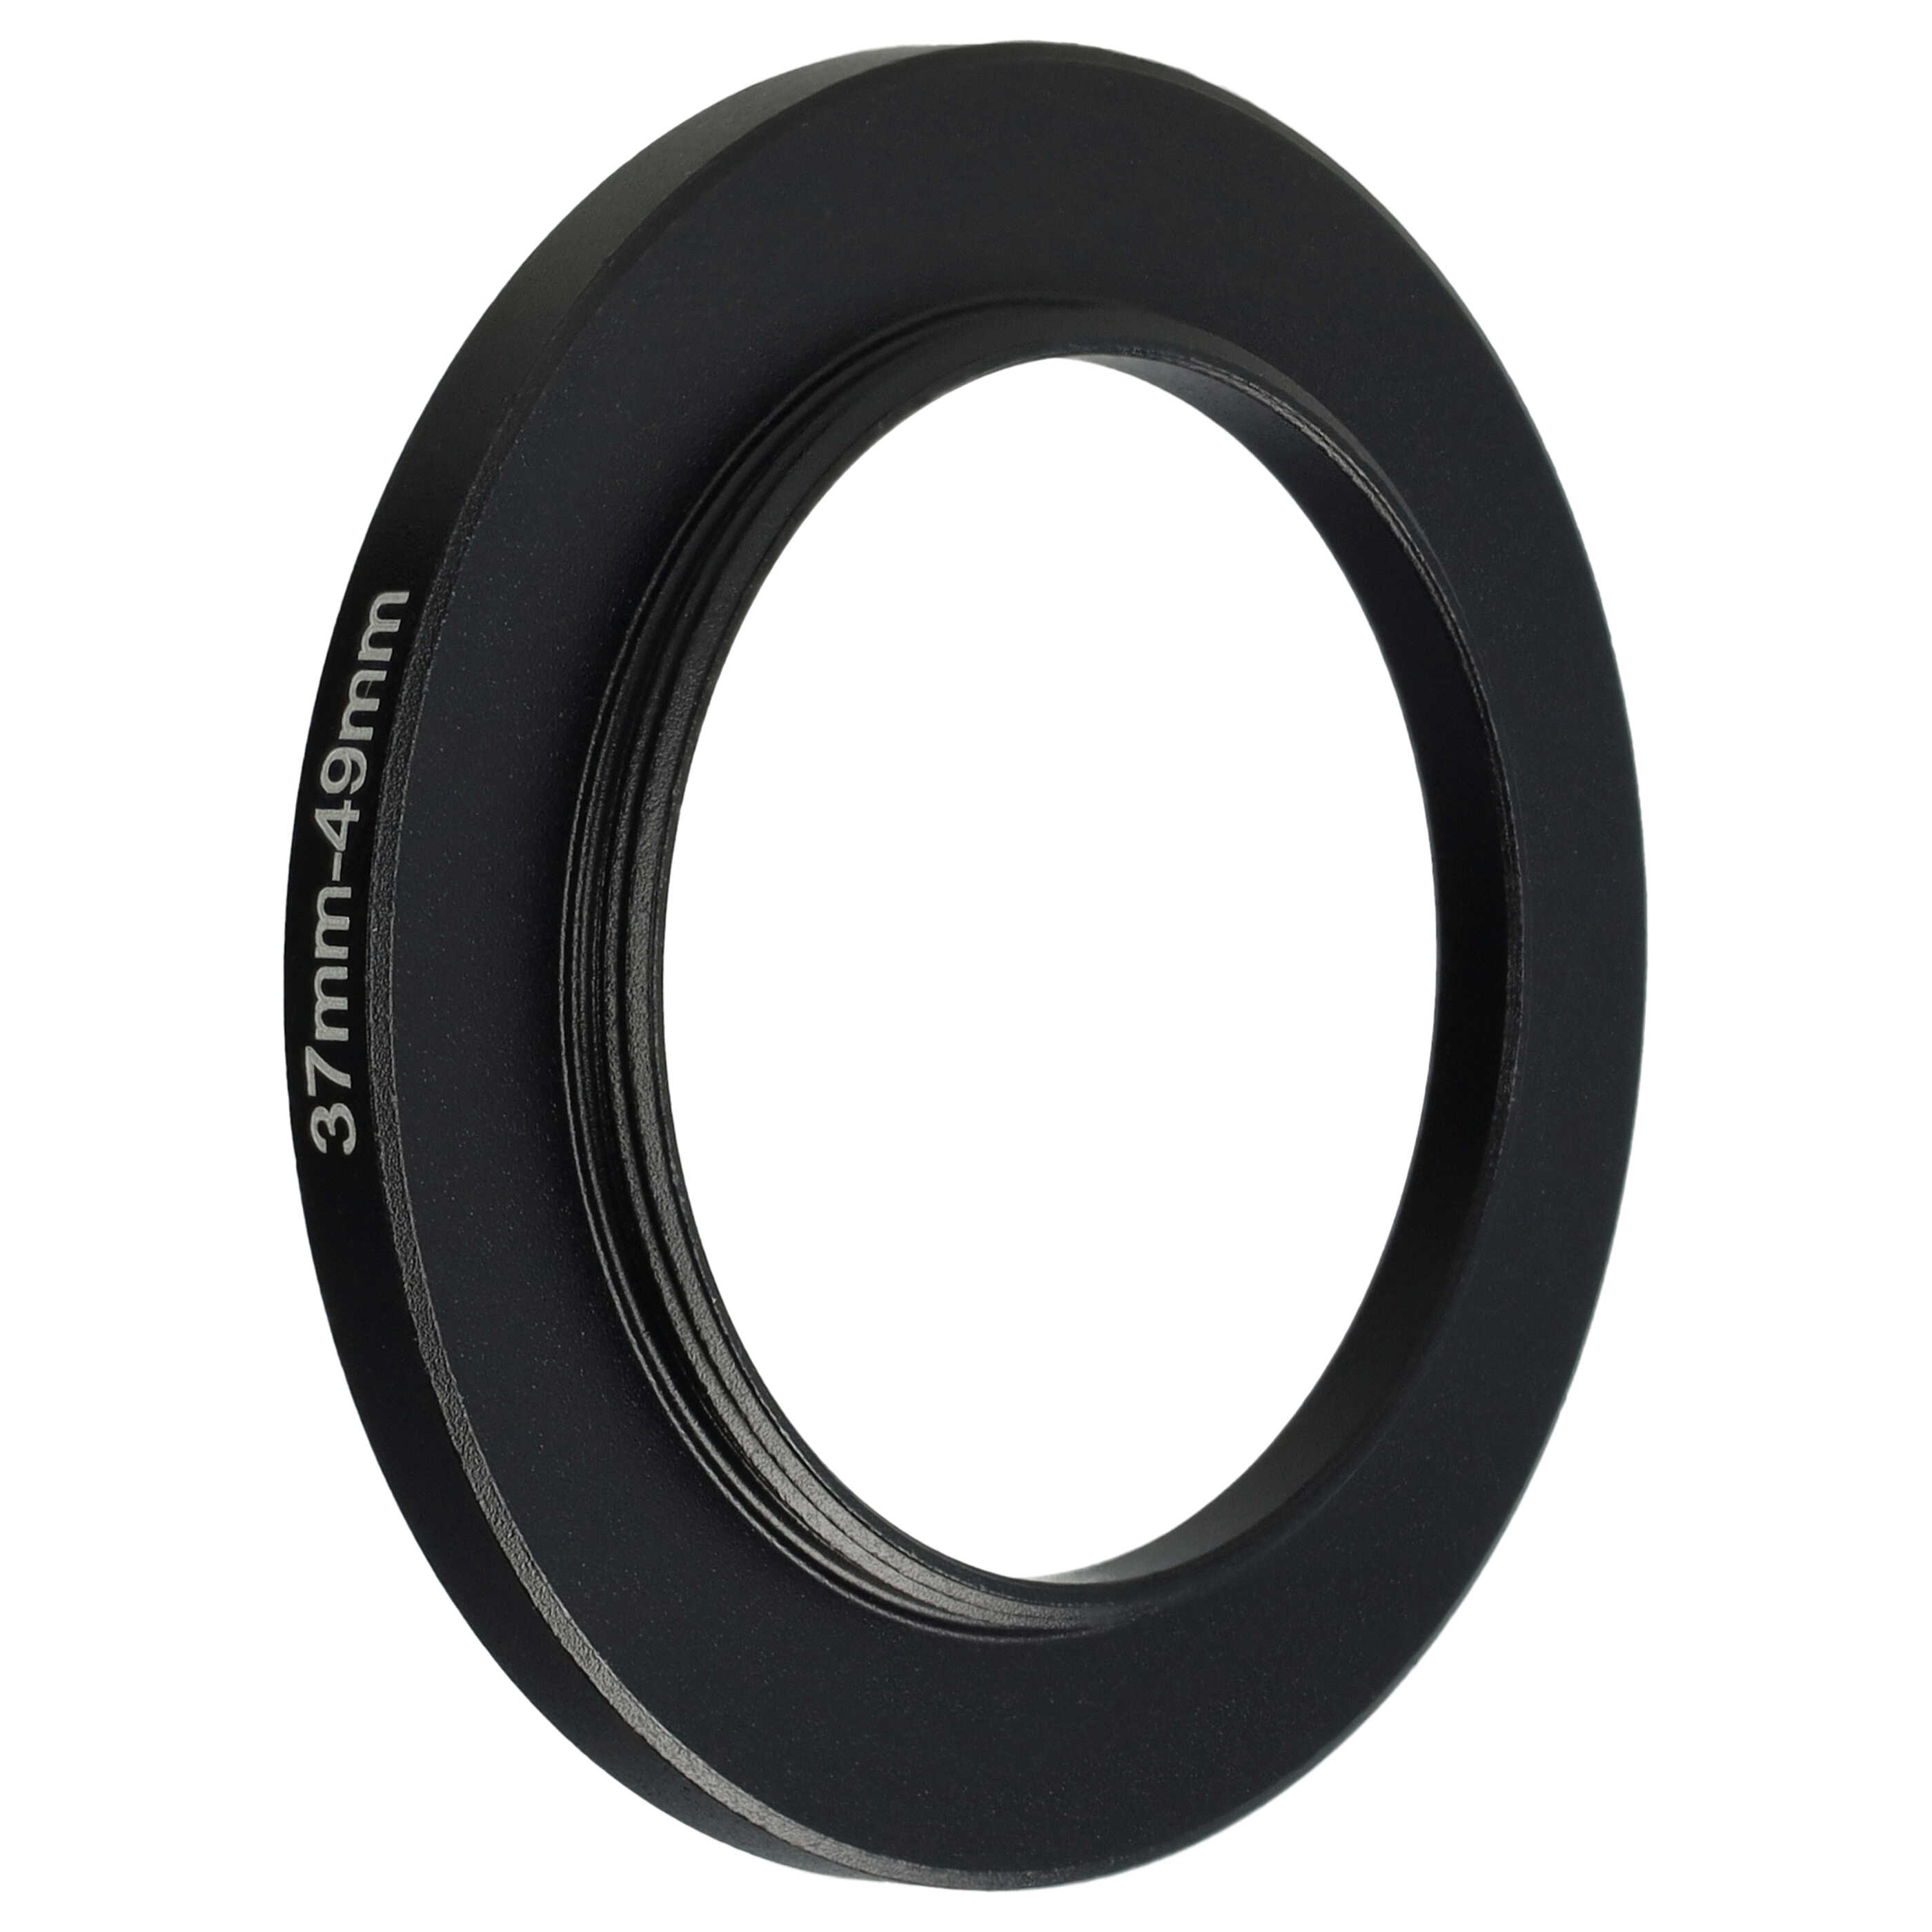 Step-Up Ring Adapter of 37 mm to 49 mmfor various Camera Lens - Filter Adapter